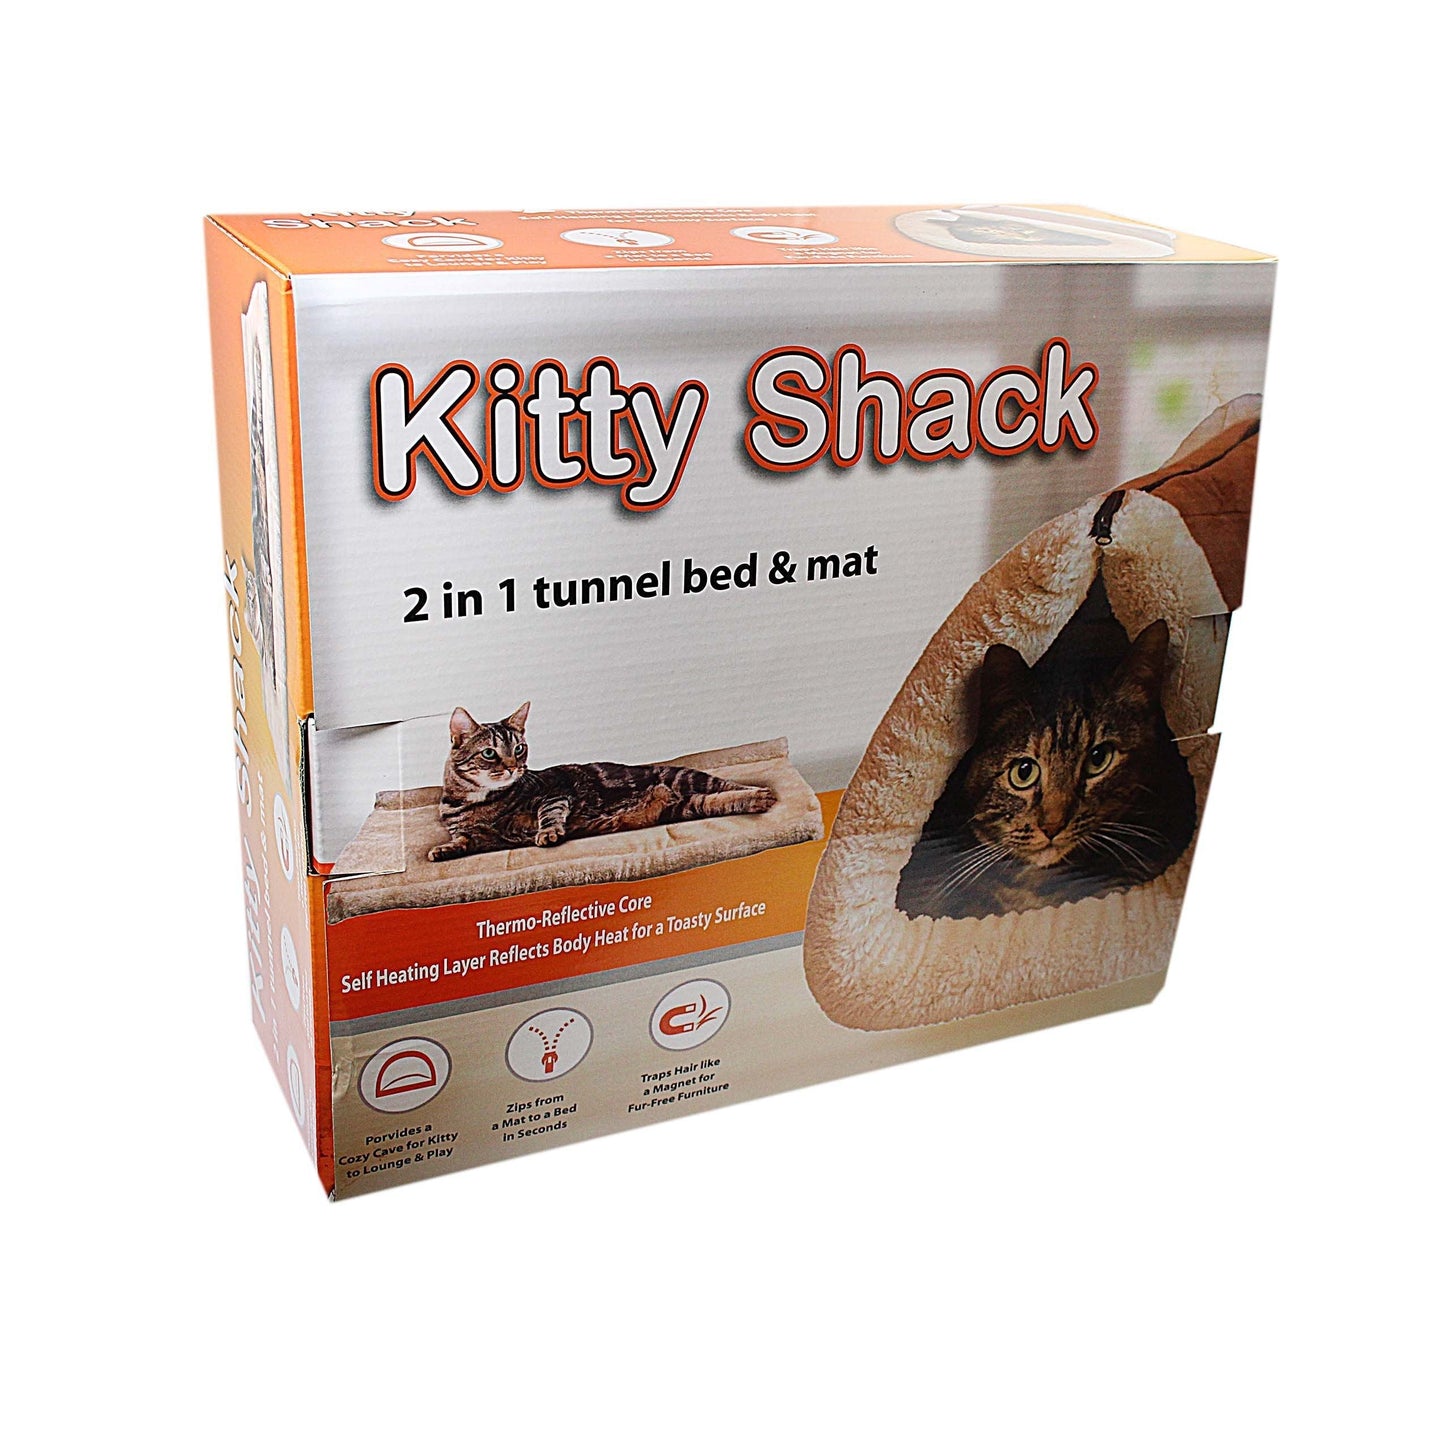 Kitty Shack 2 in 1 Tunnel Bed and Mat 5025 A (Parcel Rate)